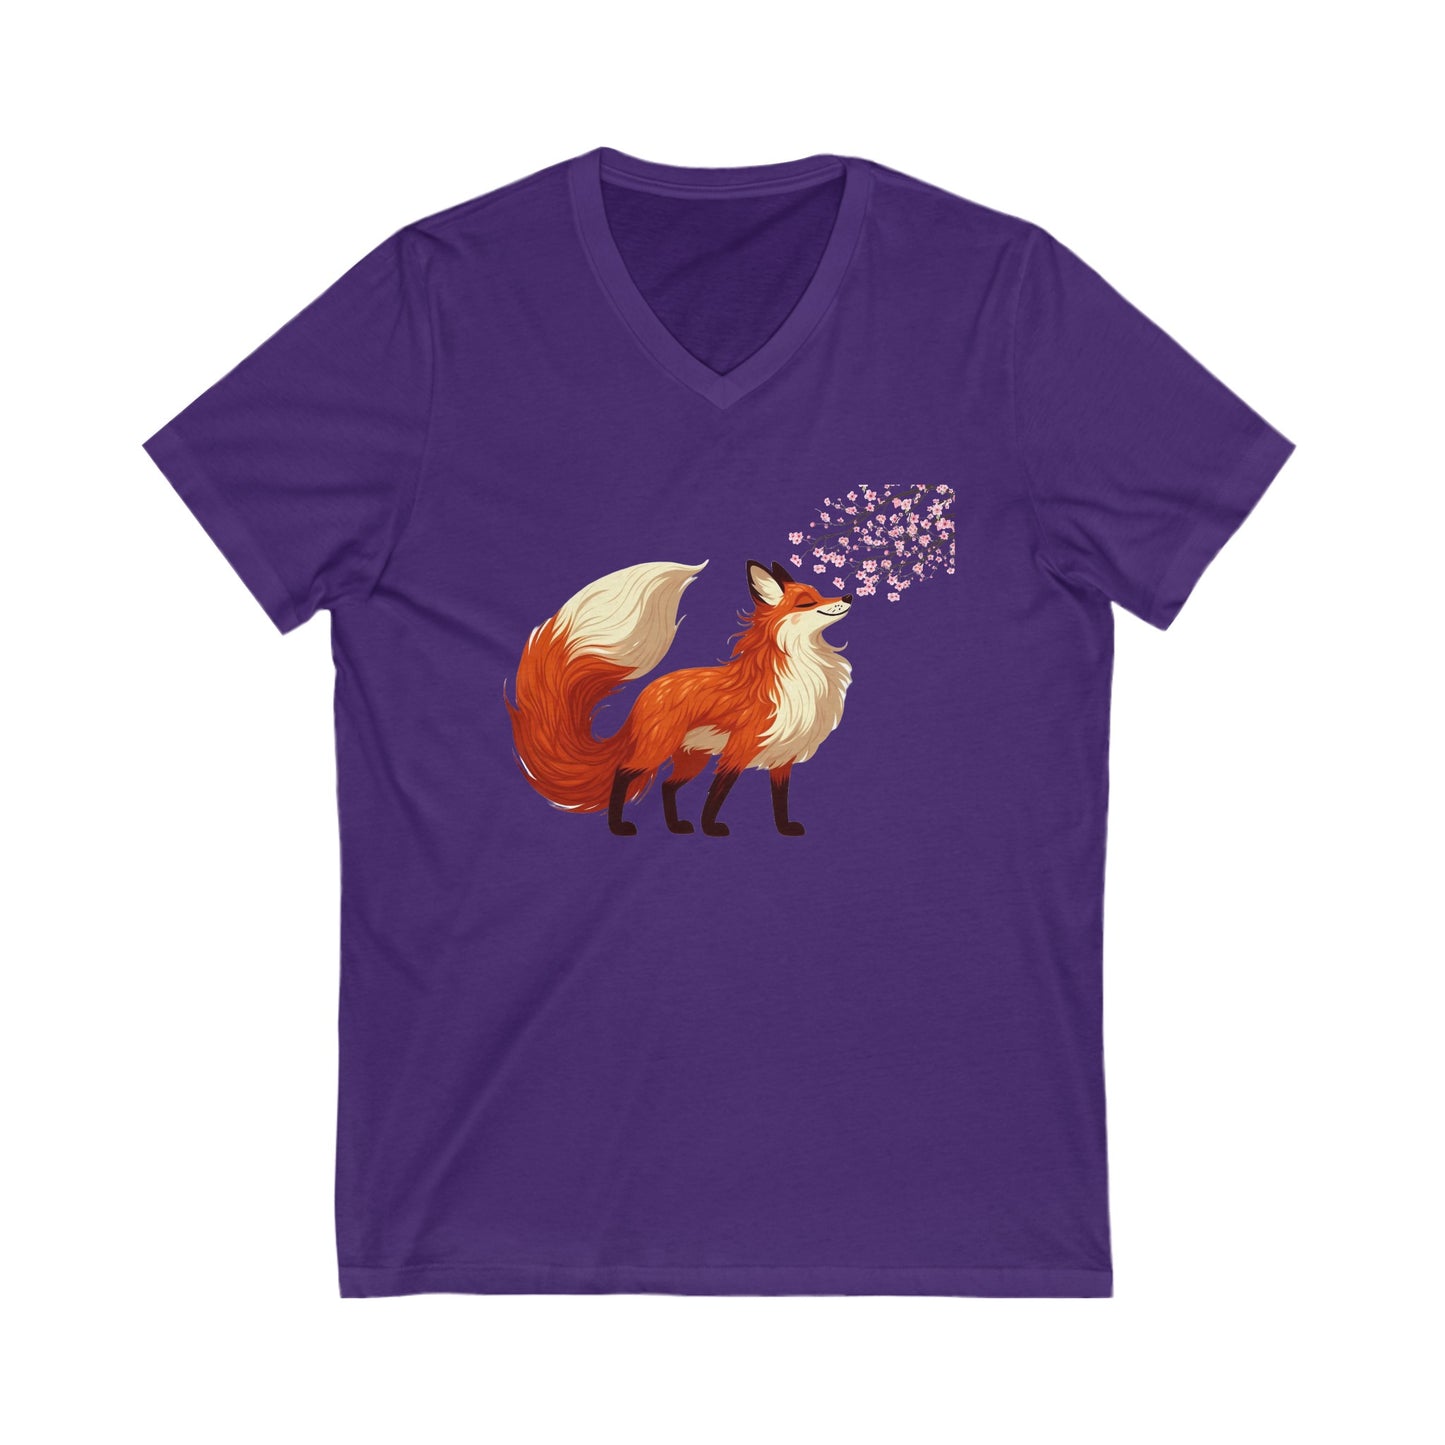 Red Fox Under A Cherry Blossom Tree Graphic T-shirt